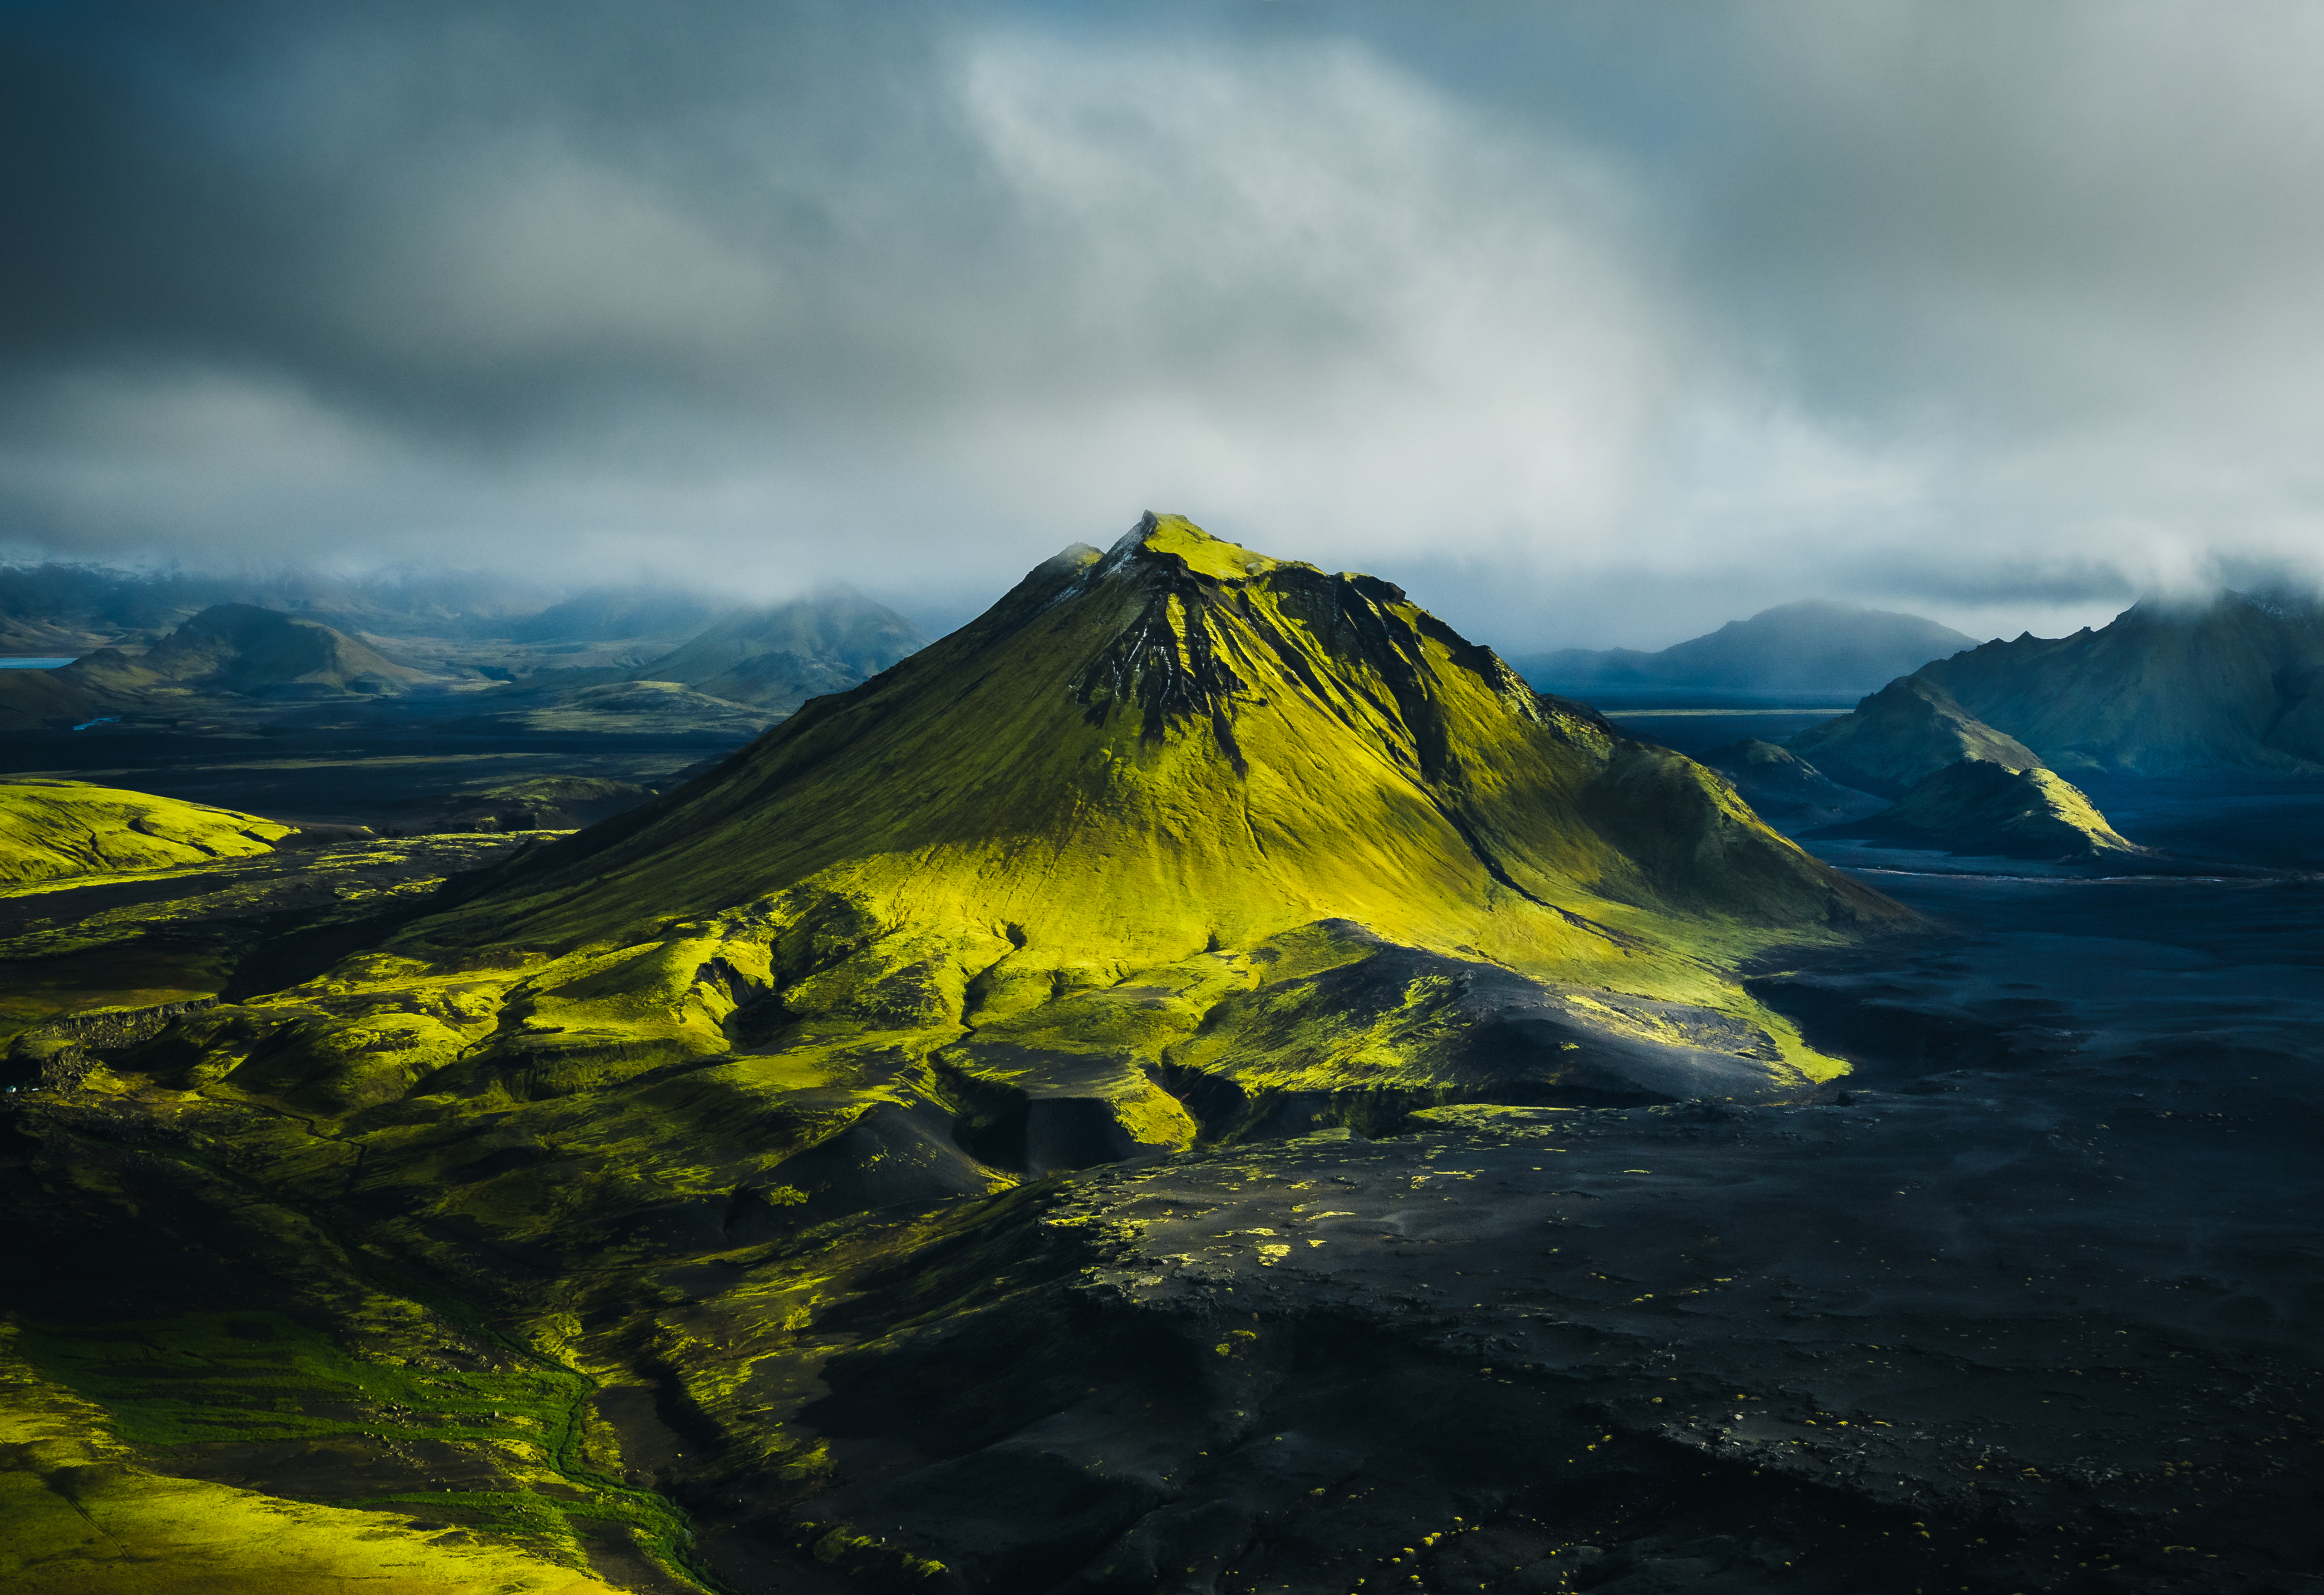 General 5120x3513 photography nature Maelifell volcano Iceland fog green landscape mountains